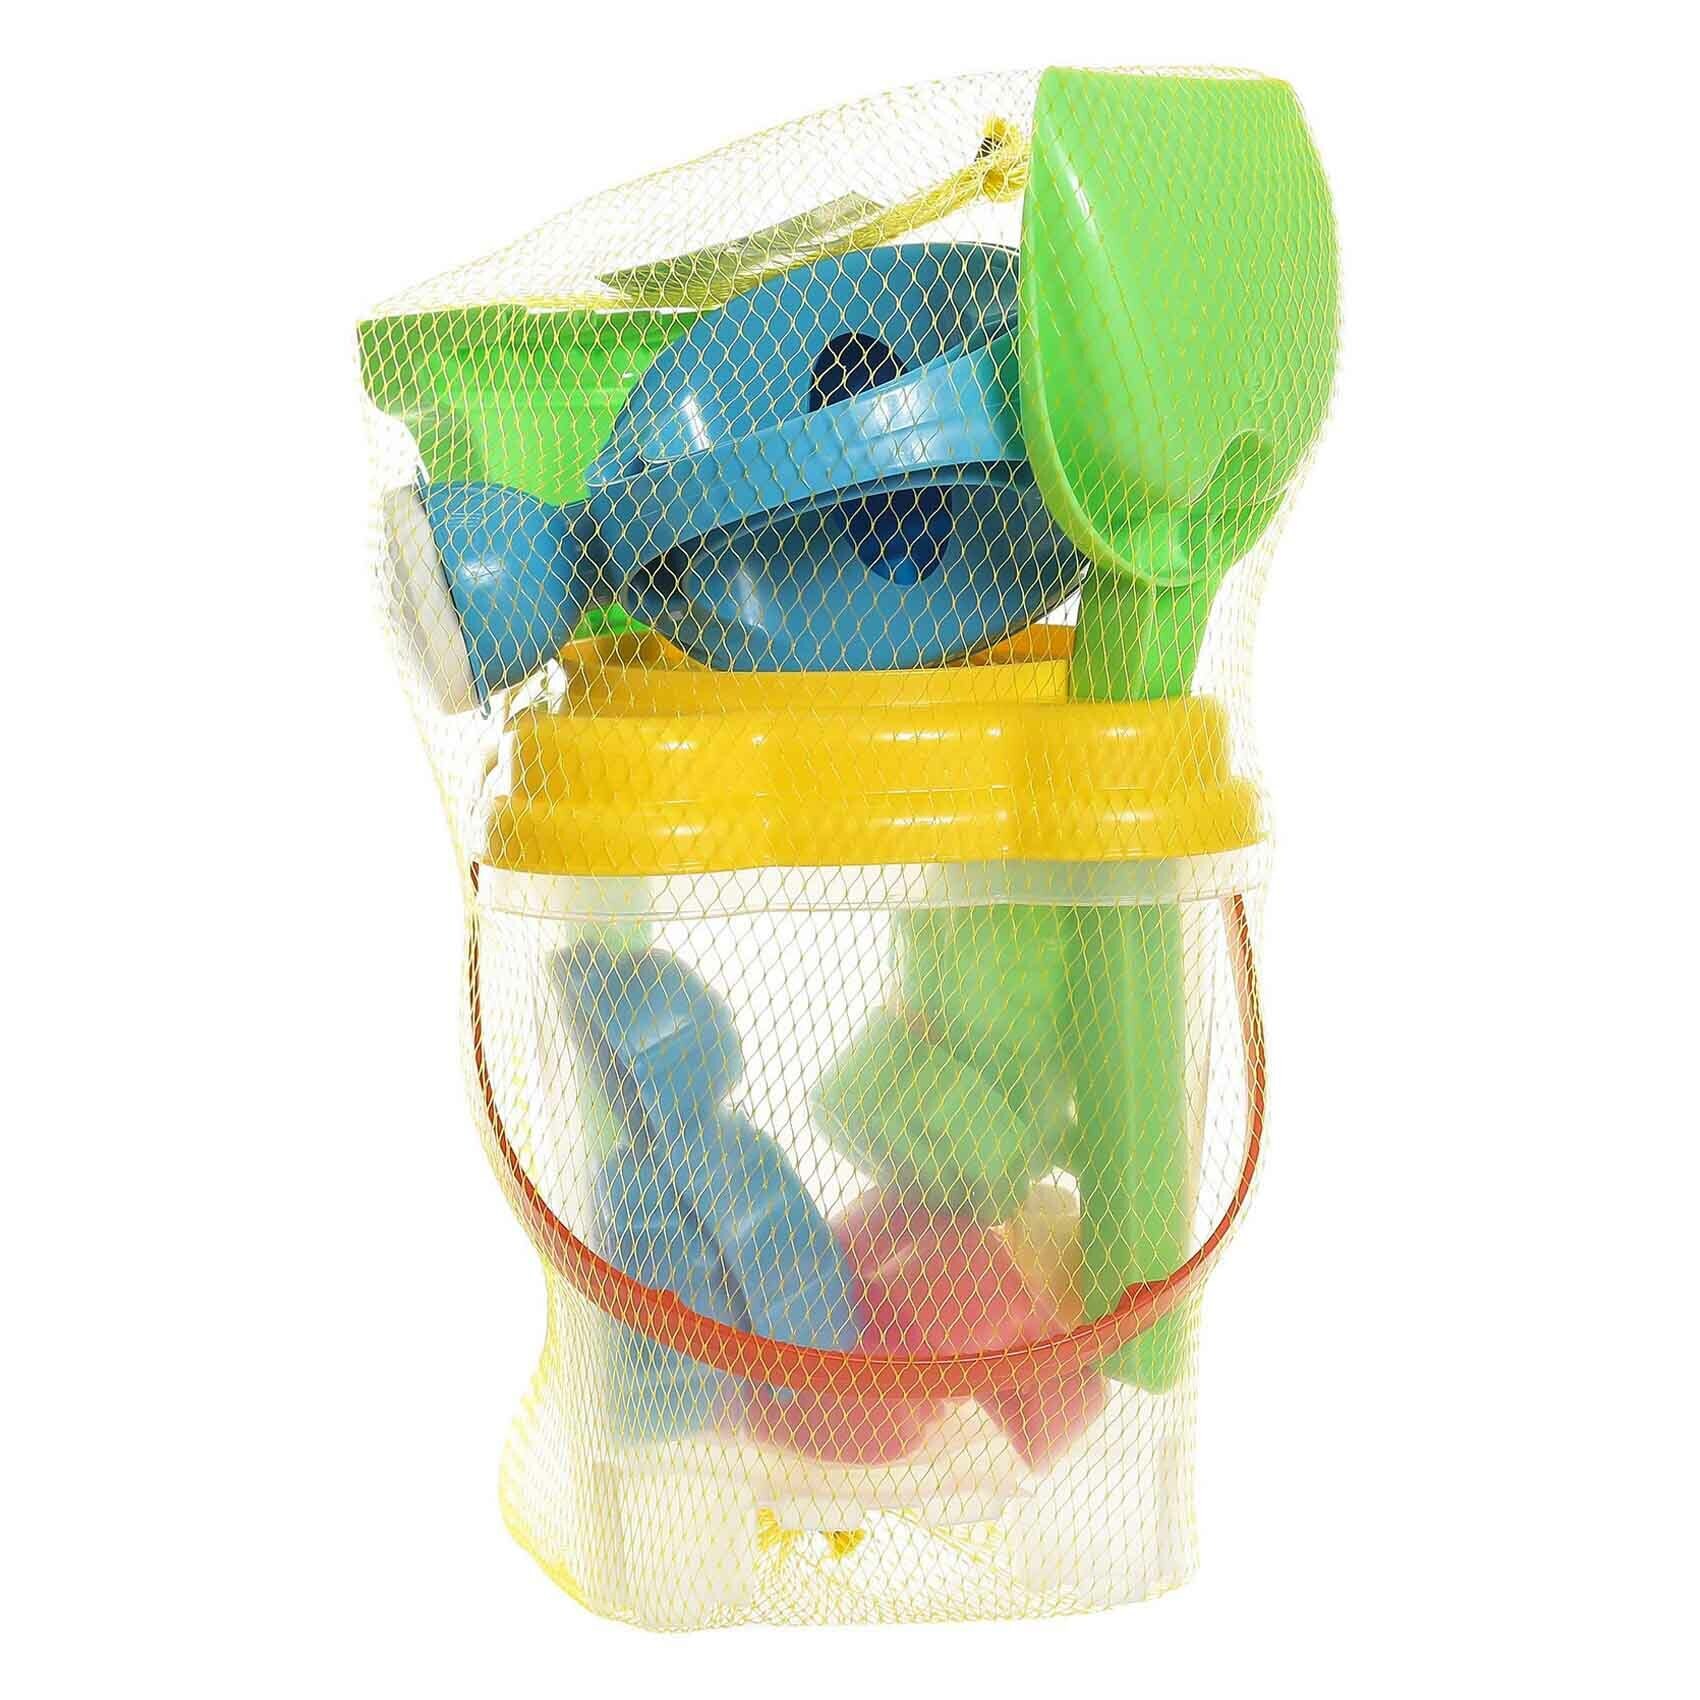 Buy Androni Giocattoli Bucket Set 1446 Online - Shop Toys & Outdoor on ...